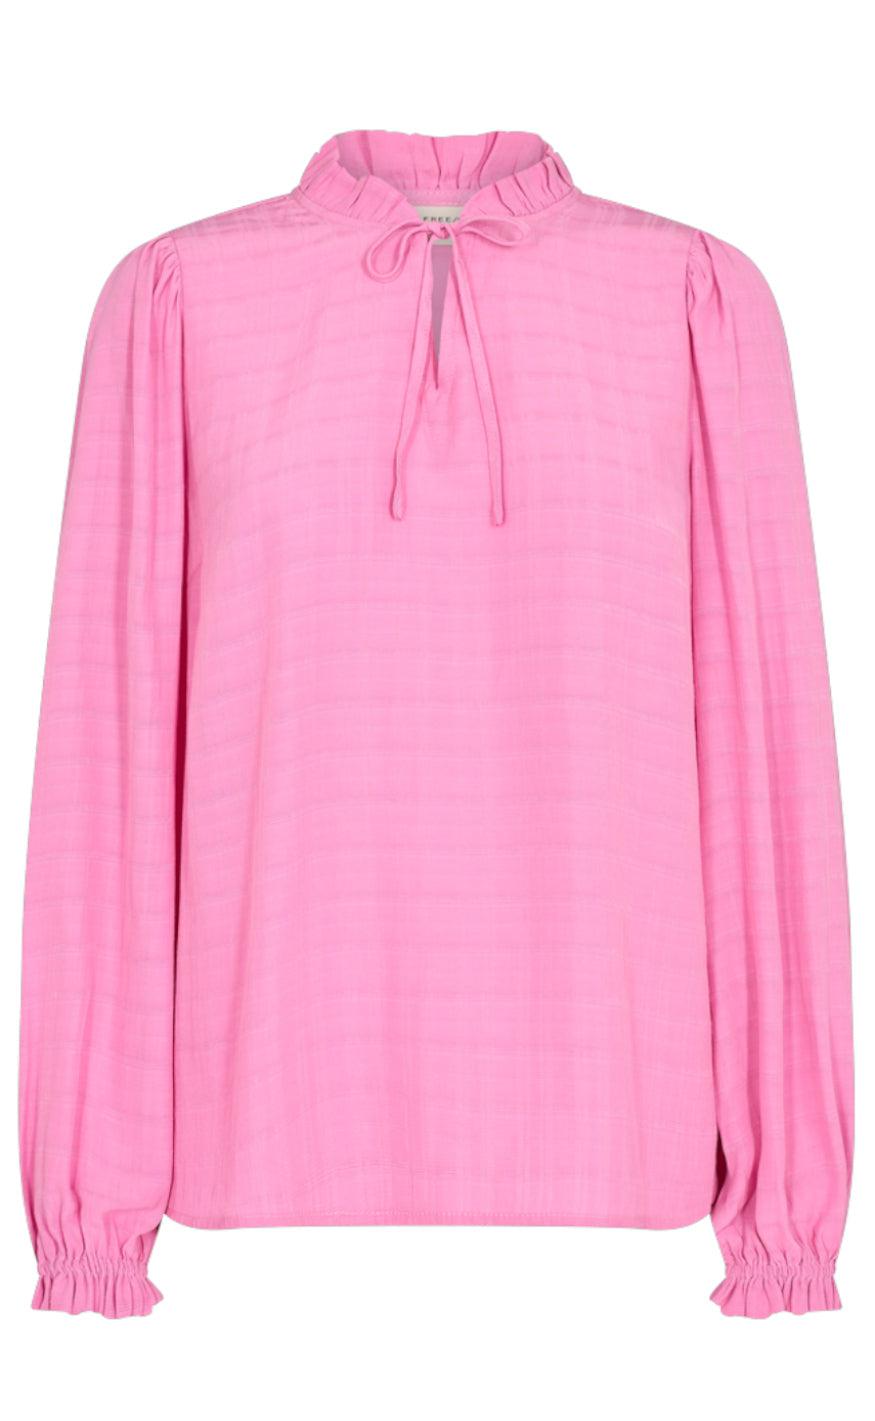 Freequent Bluse - Need - Fuchsia Pink